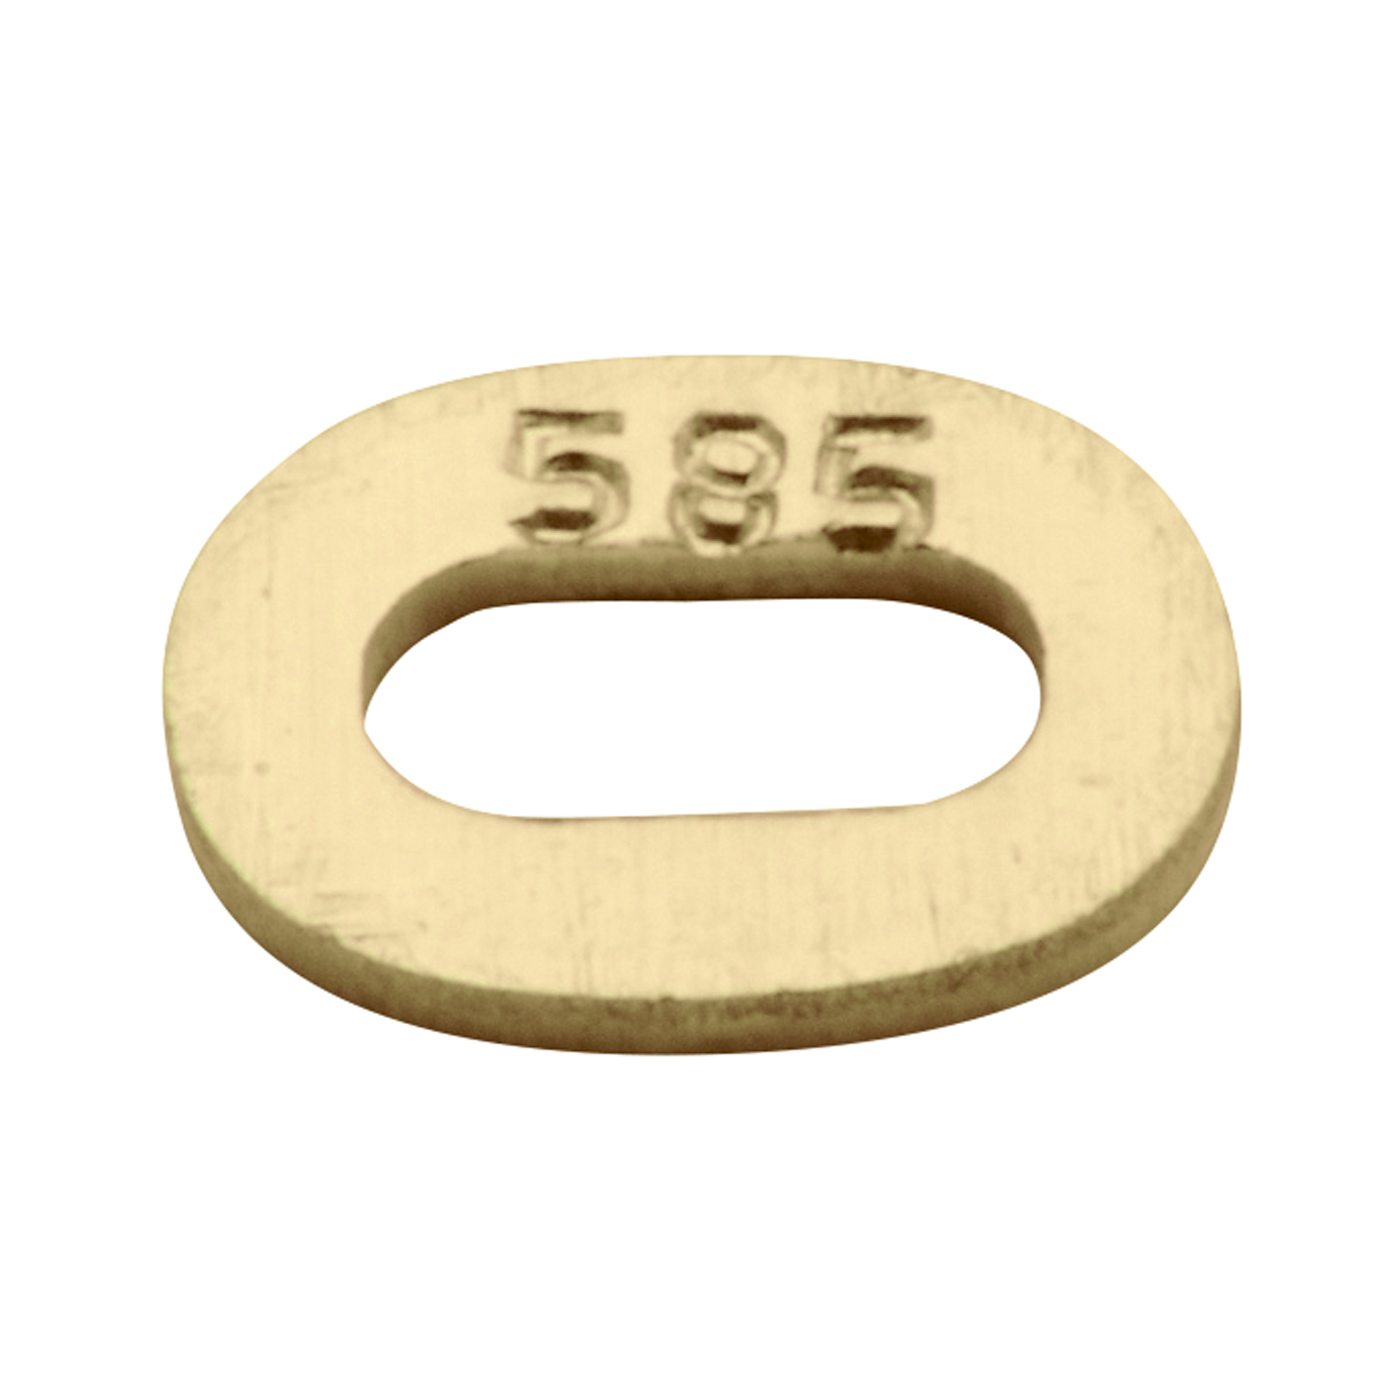 Chain Tag, Oval, 750G, 4.9 x 3.6 mm - 10 pieces